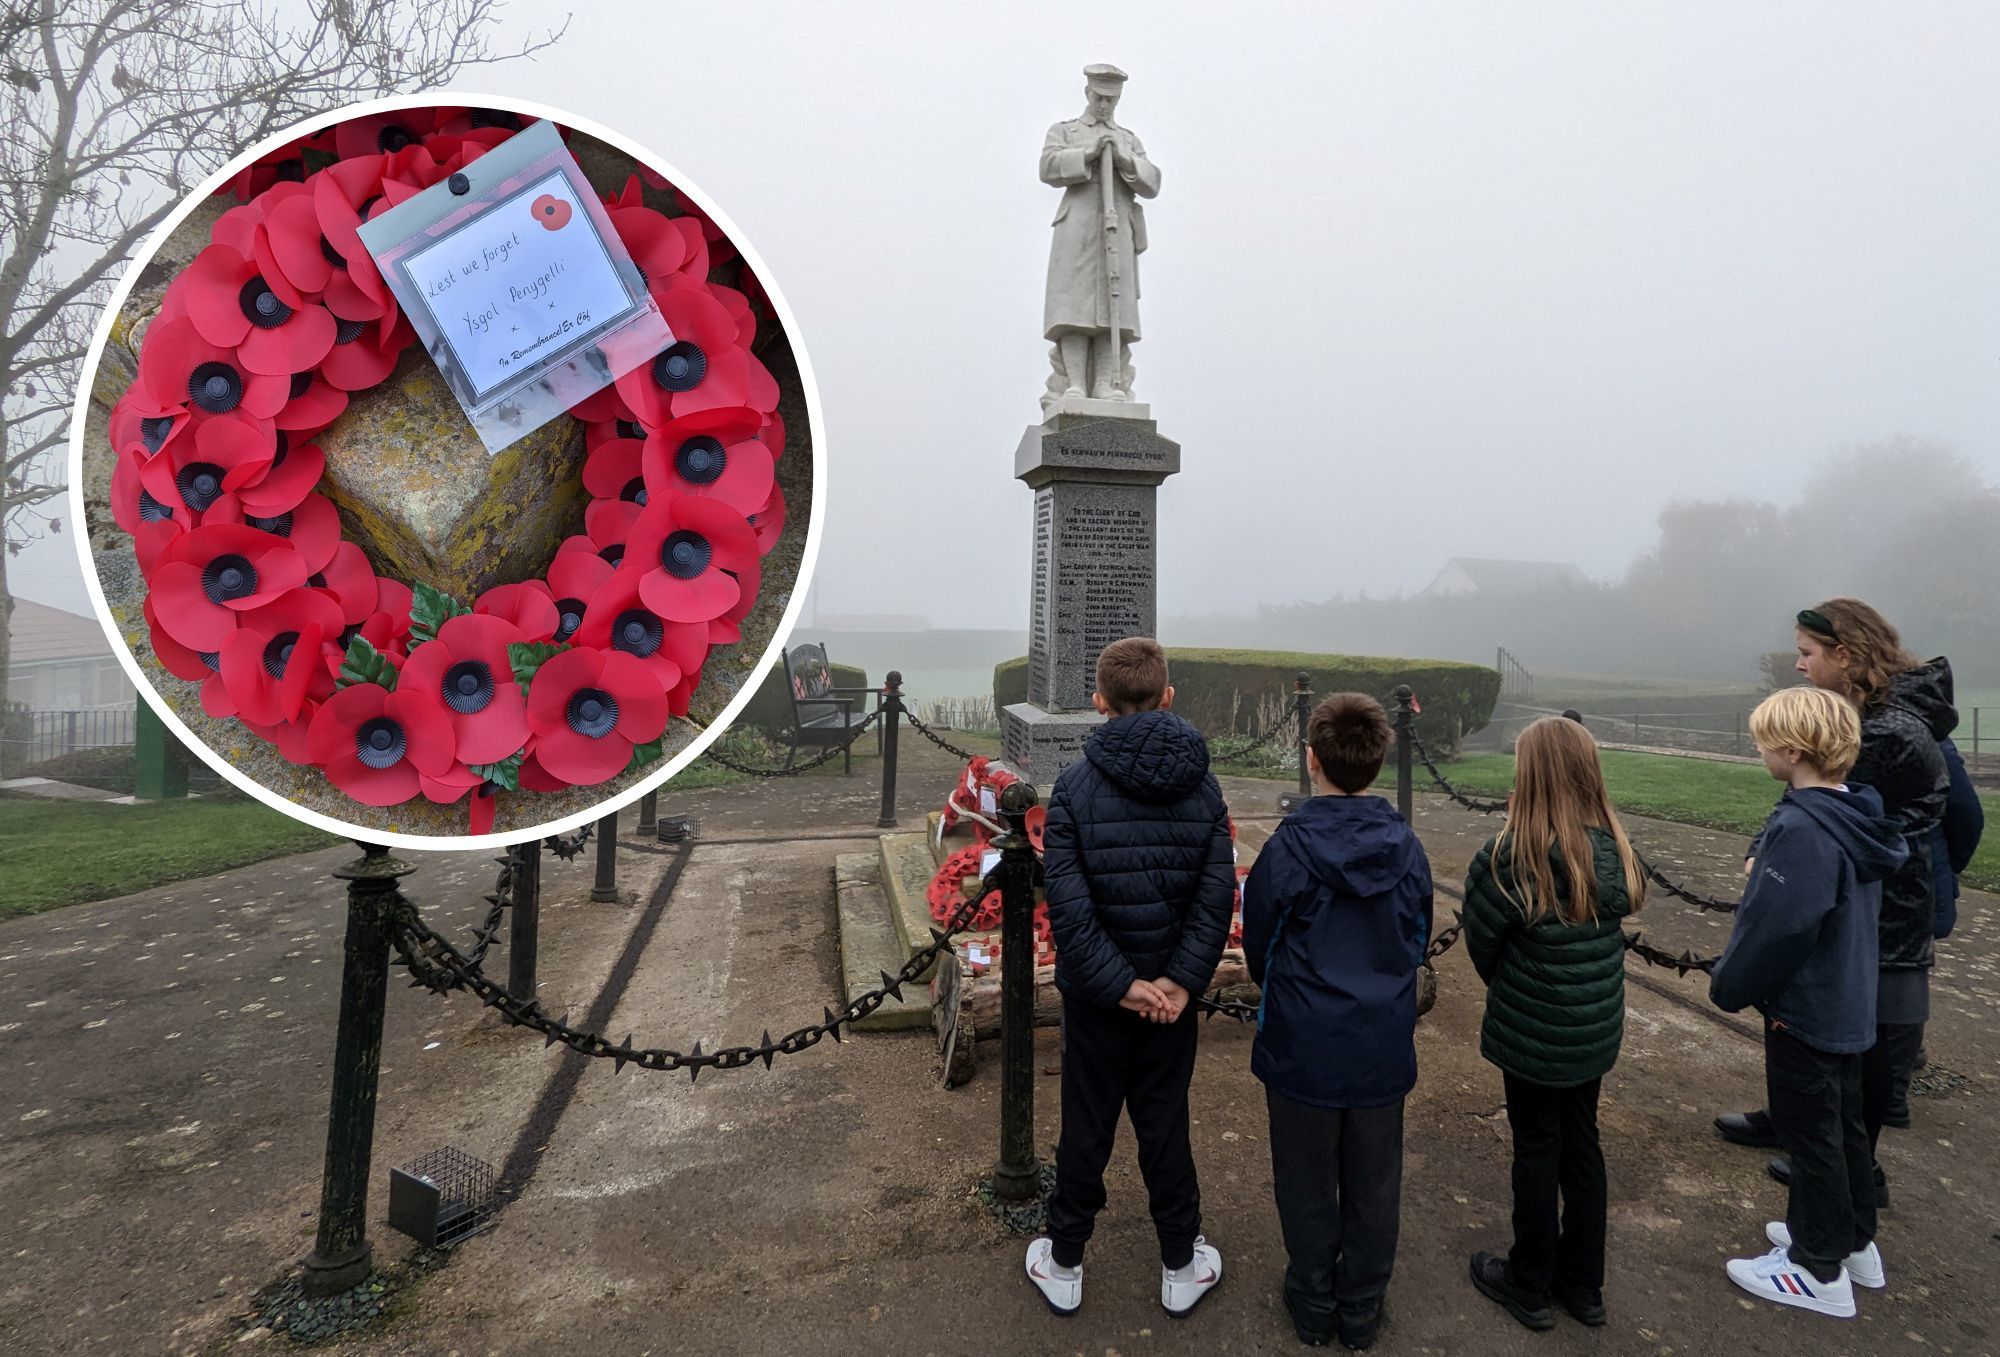 Remembrance from Ysgol Penygelli pupils.